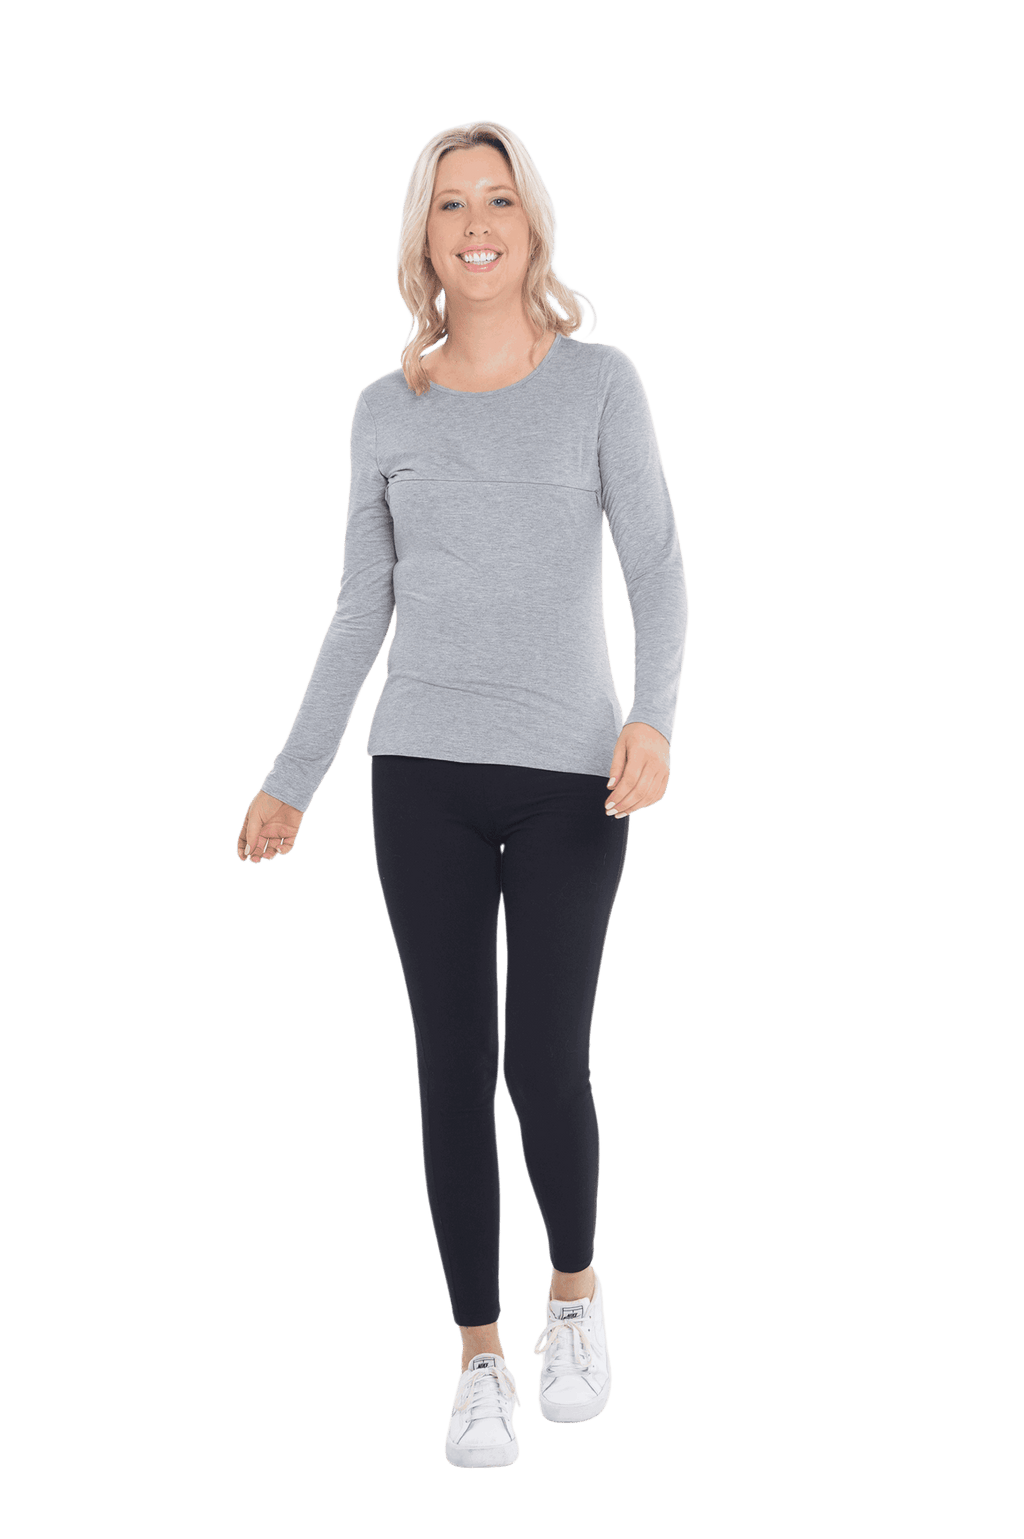 Petite model facing camera wearing grey, long sleeved tee, features rounded neckline. Cindy available in sizes 6-26